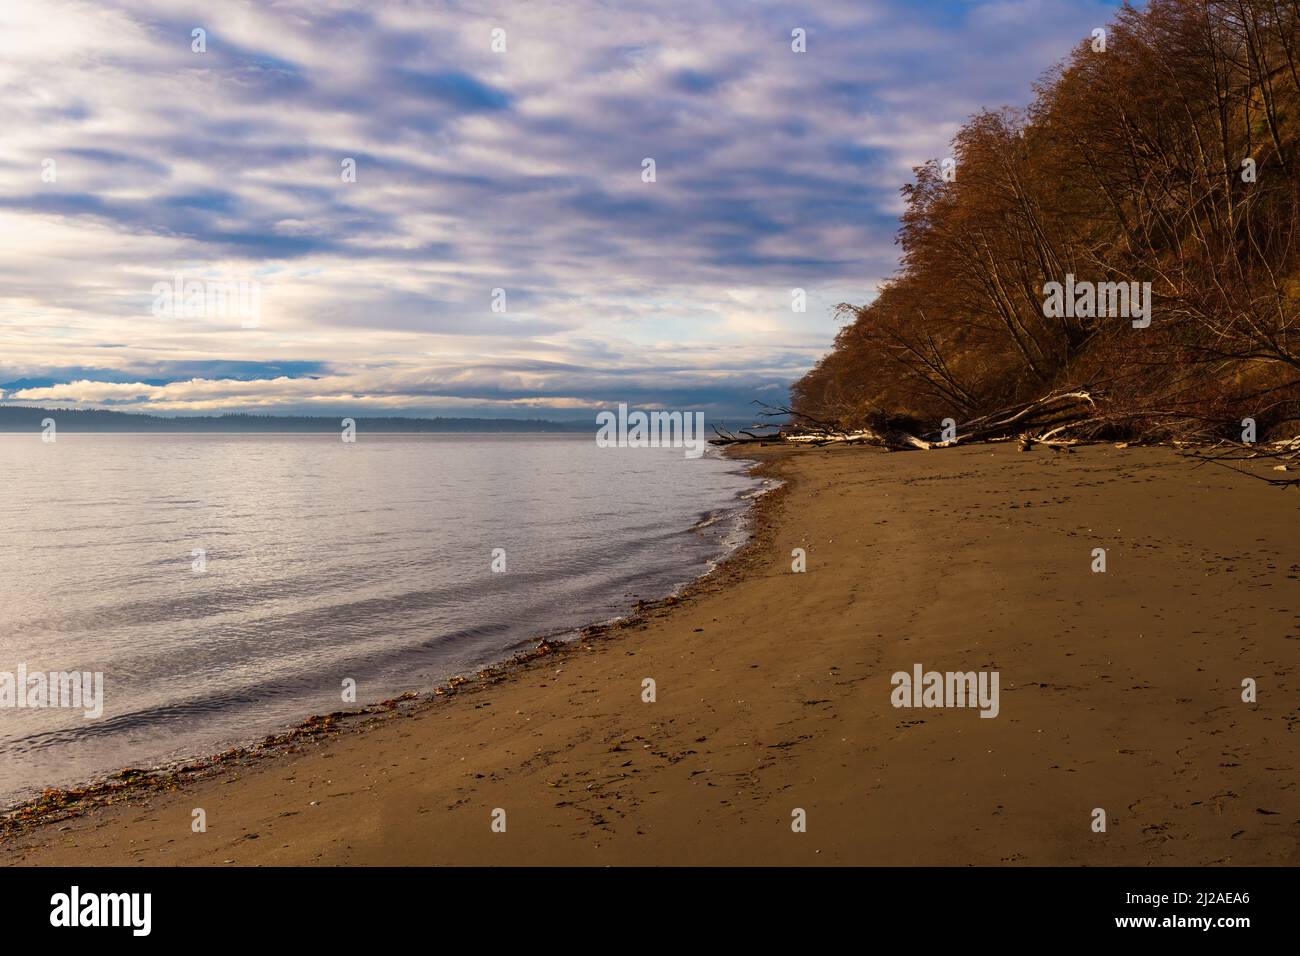 A BEACH AND THE PUGHT SOUND SHORELINE ON WHIDBEY ISLAND WITH FALL FOLIAGE AND A BLURRY CLOUDY SKY Stock Photo